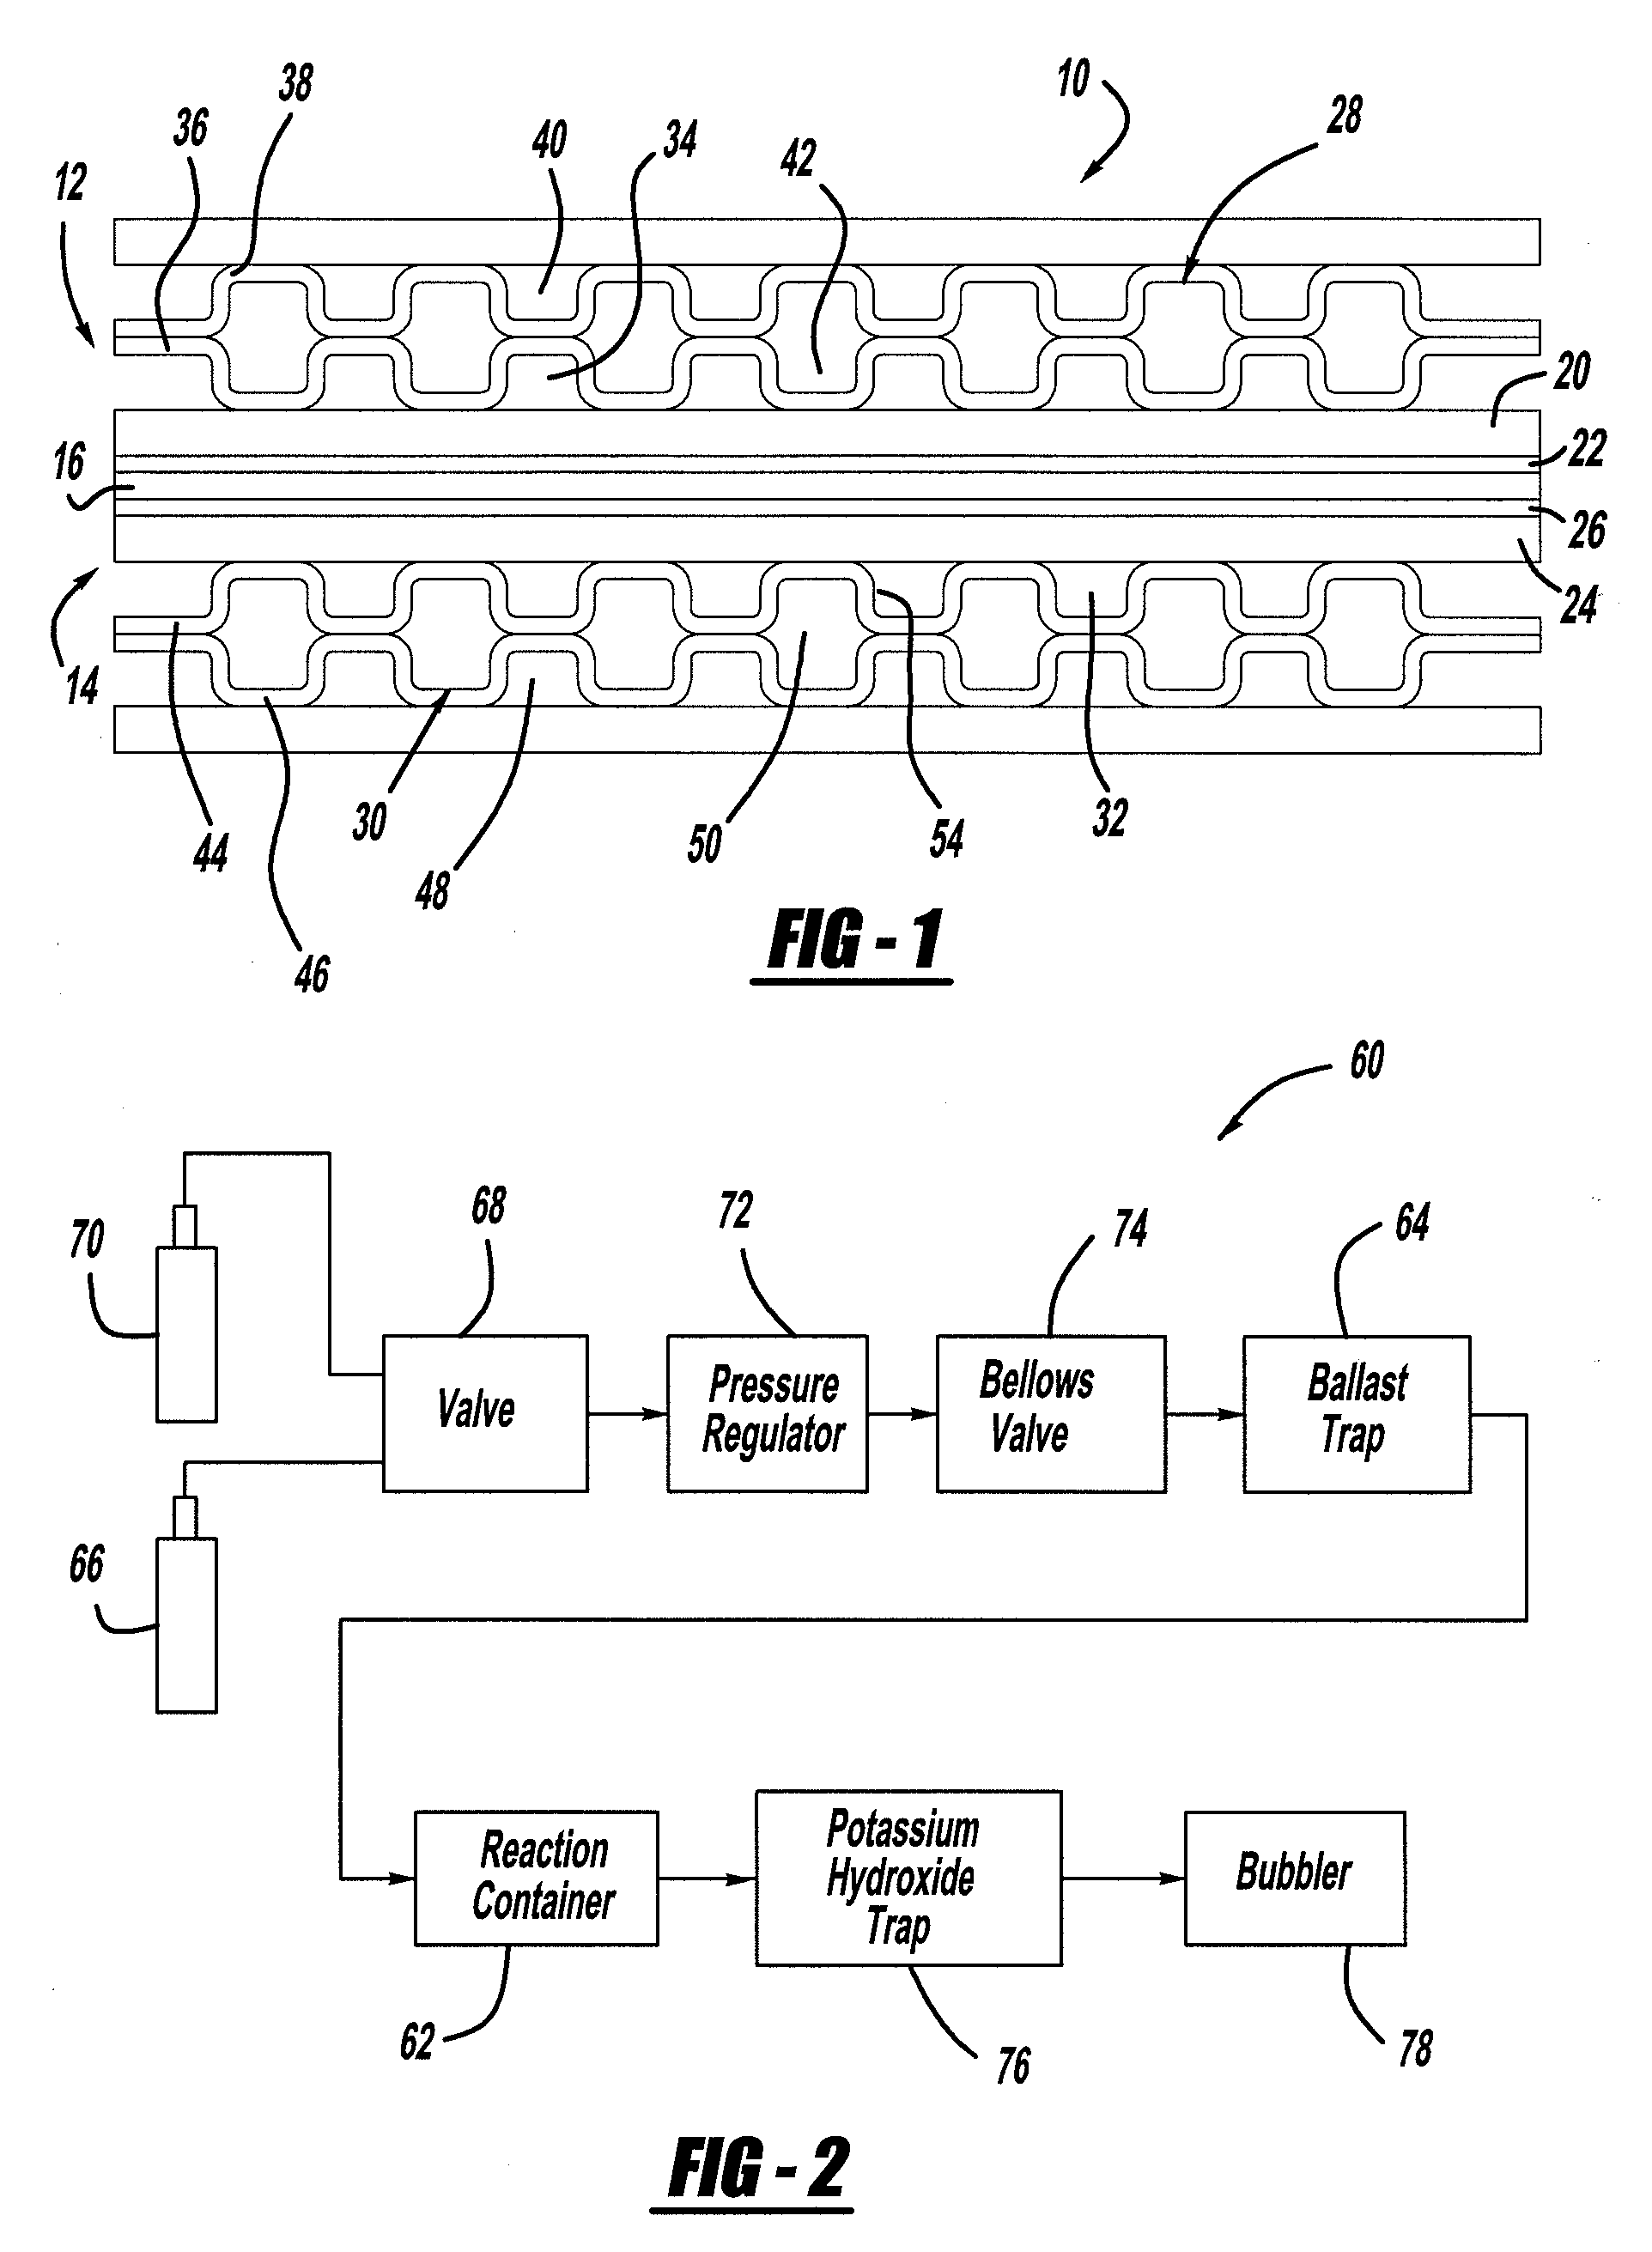 Fluorine Treatment of Polyelectrolyte Membranes